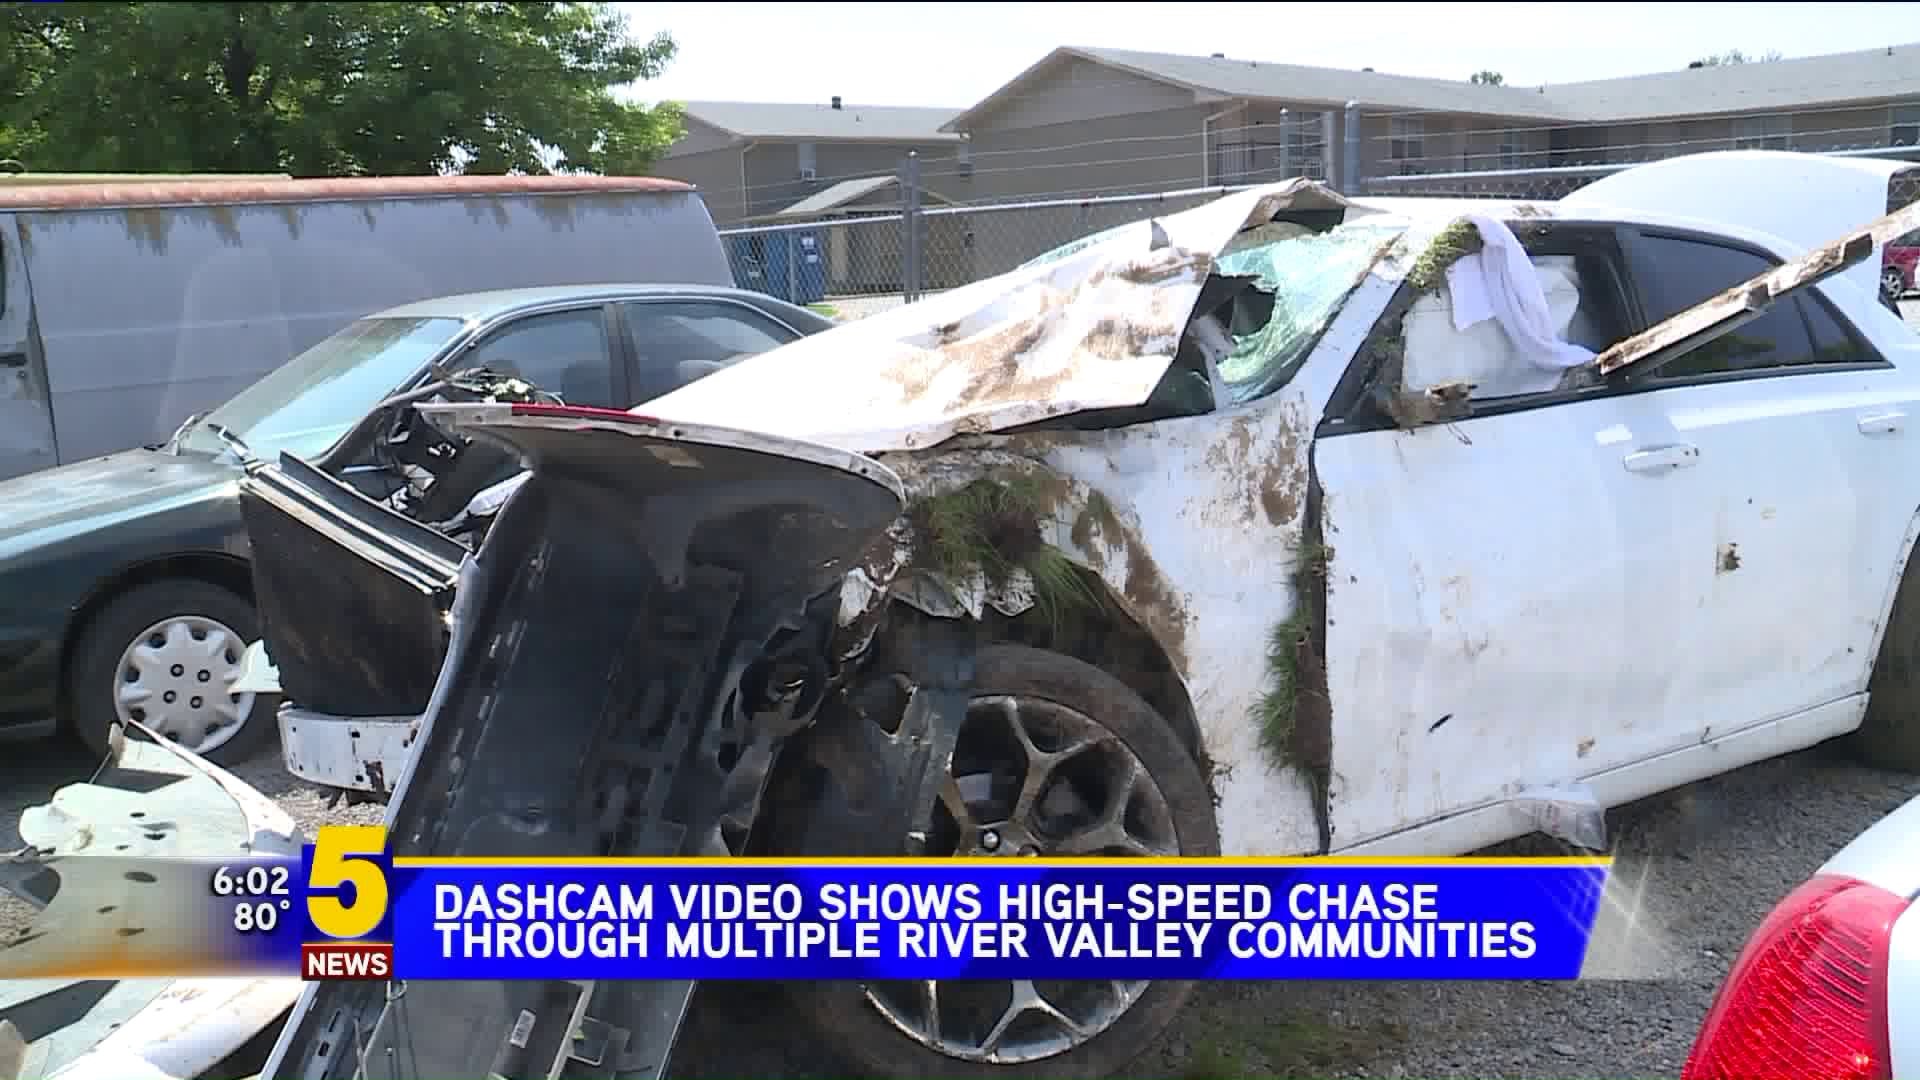 Dashcam Video Shows High-Speed Chase